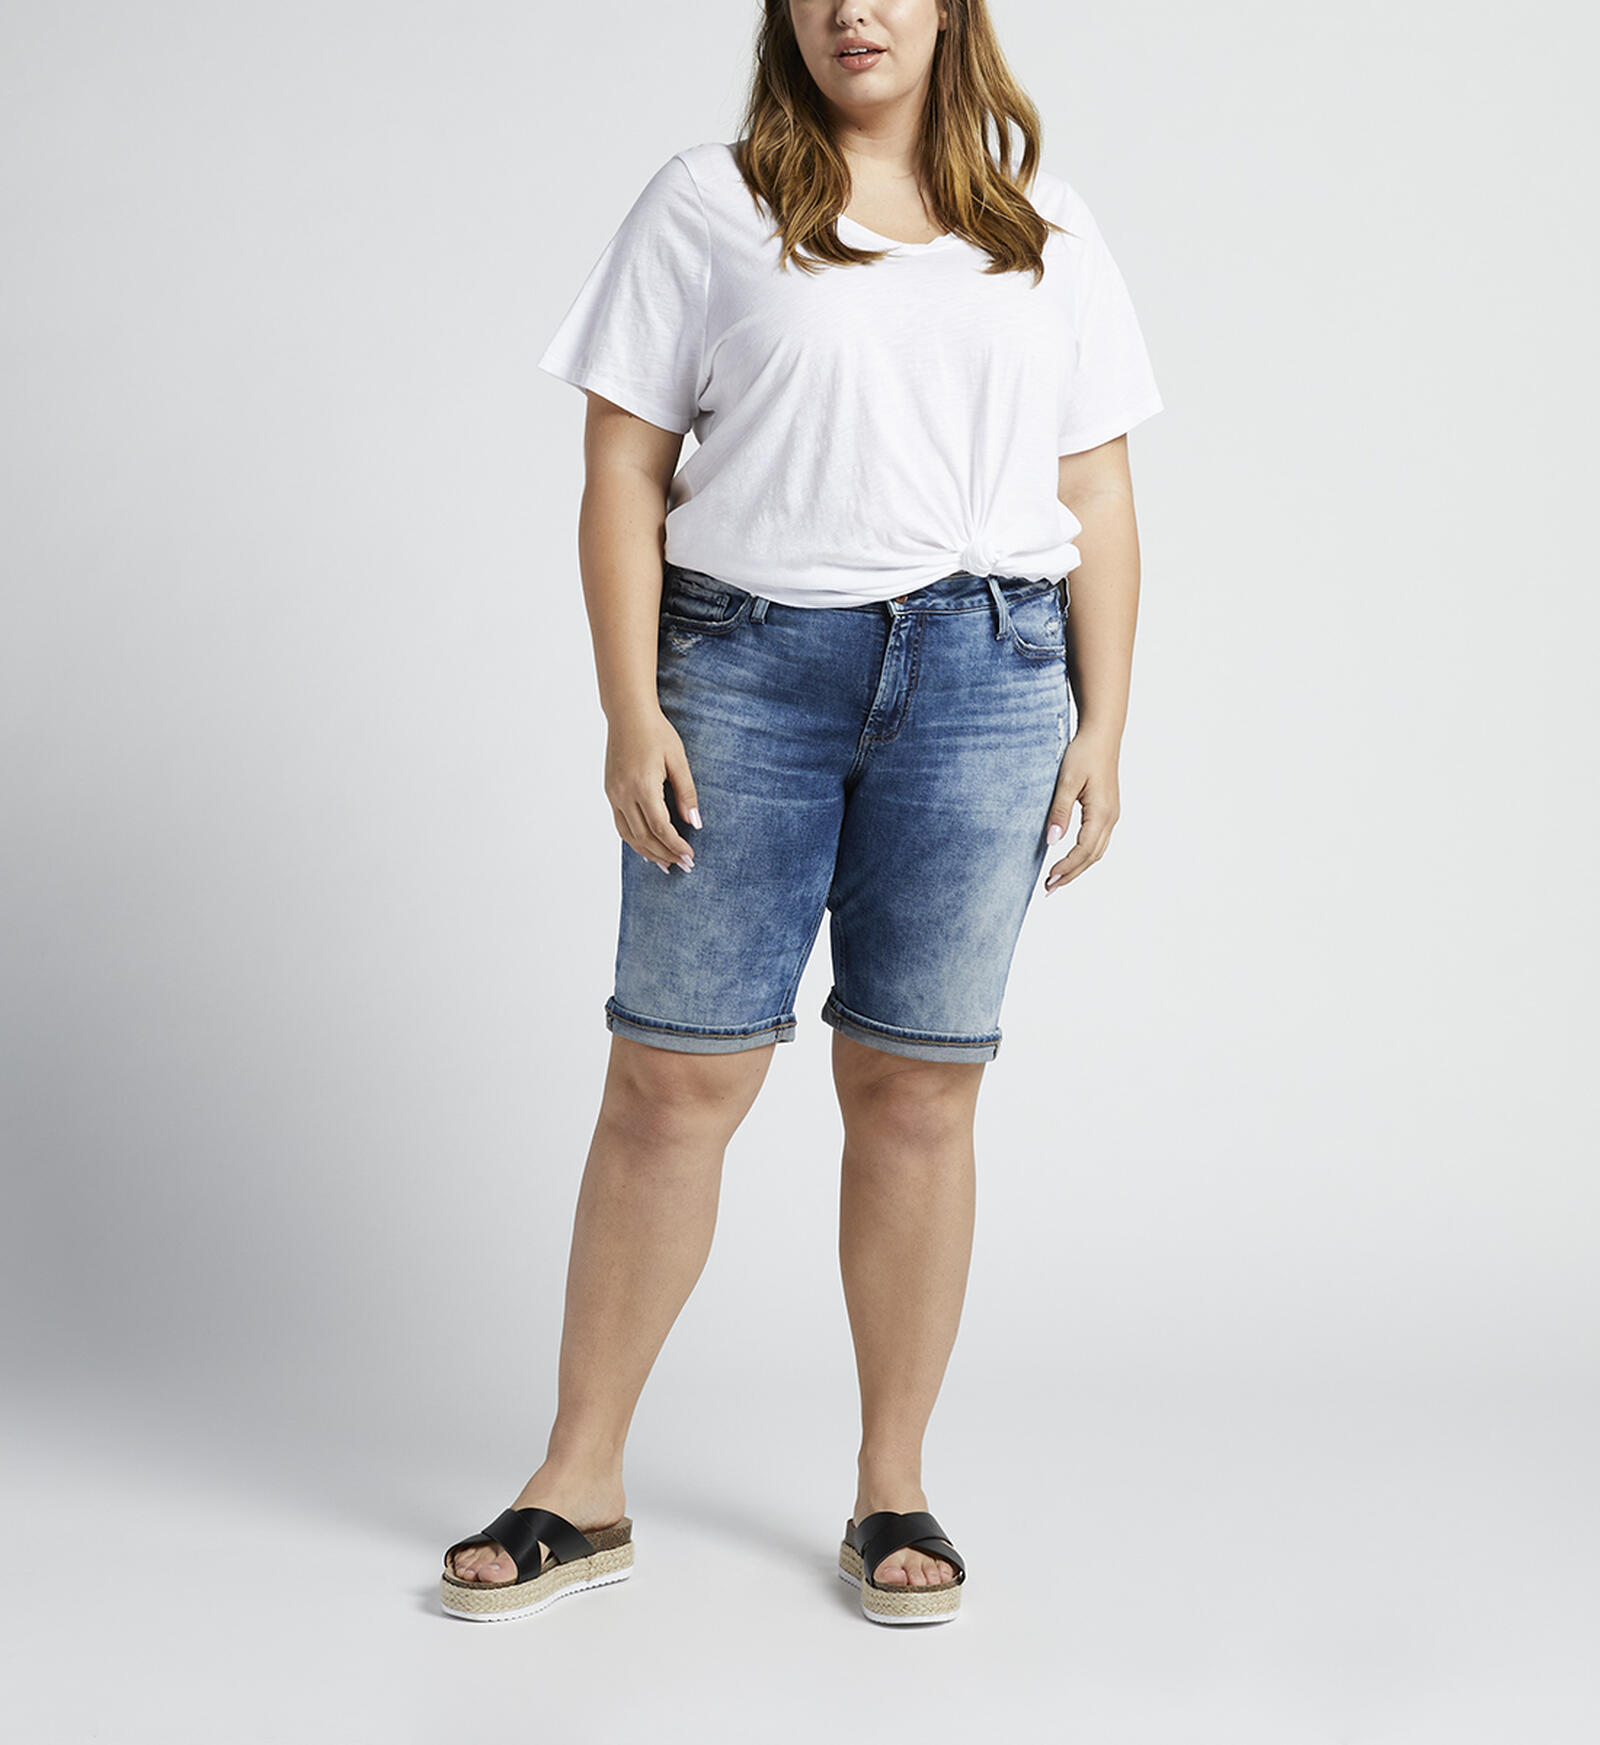 Buy Elyse Mid Rise Bermuda Short Plus Size for USD 37.00 | Silver Jeans US  New